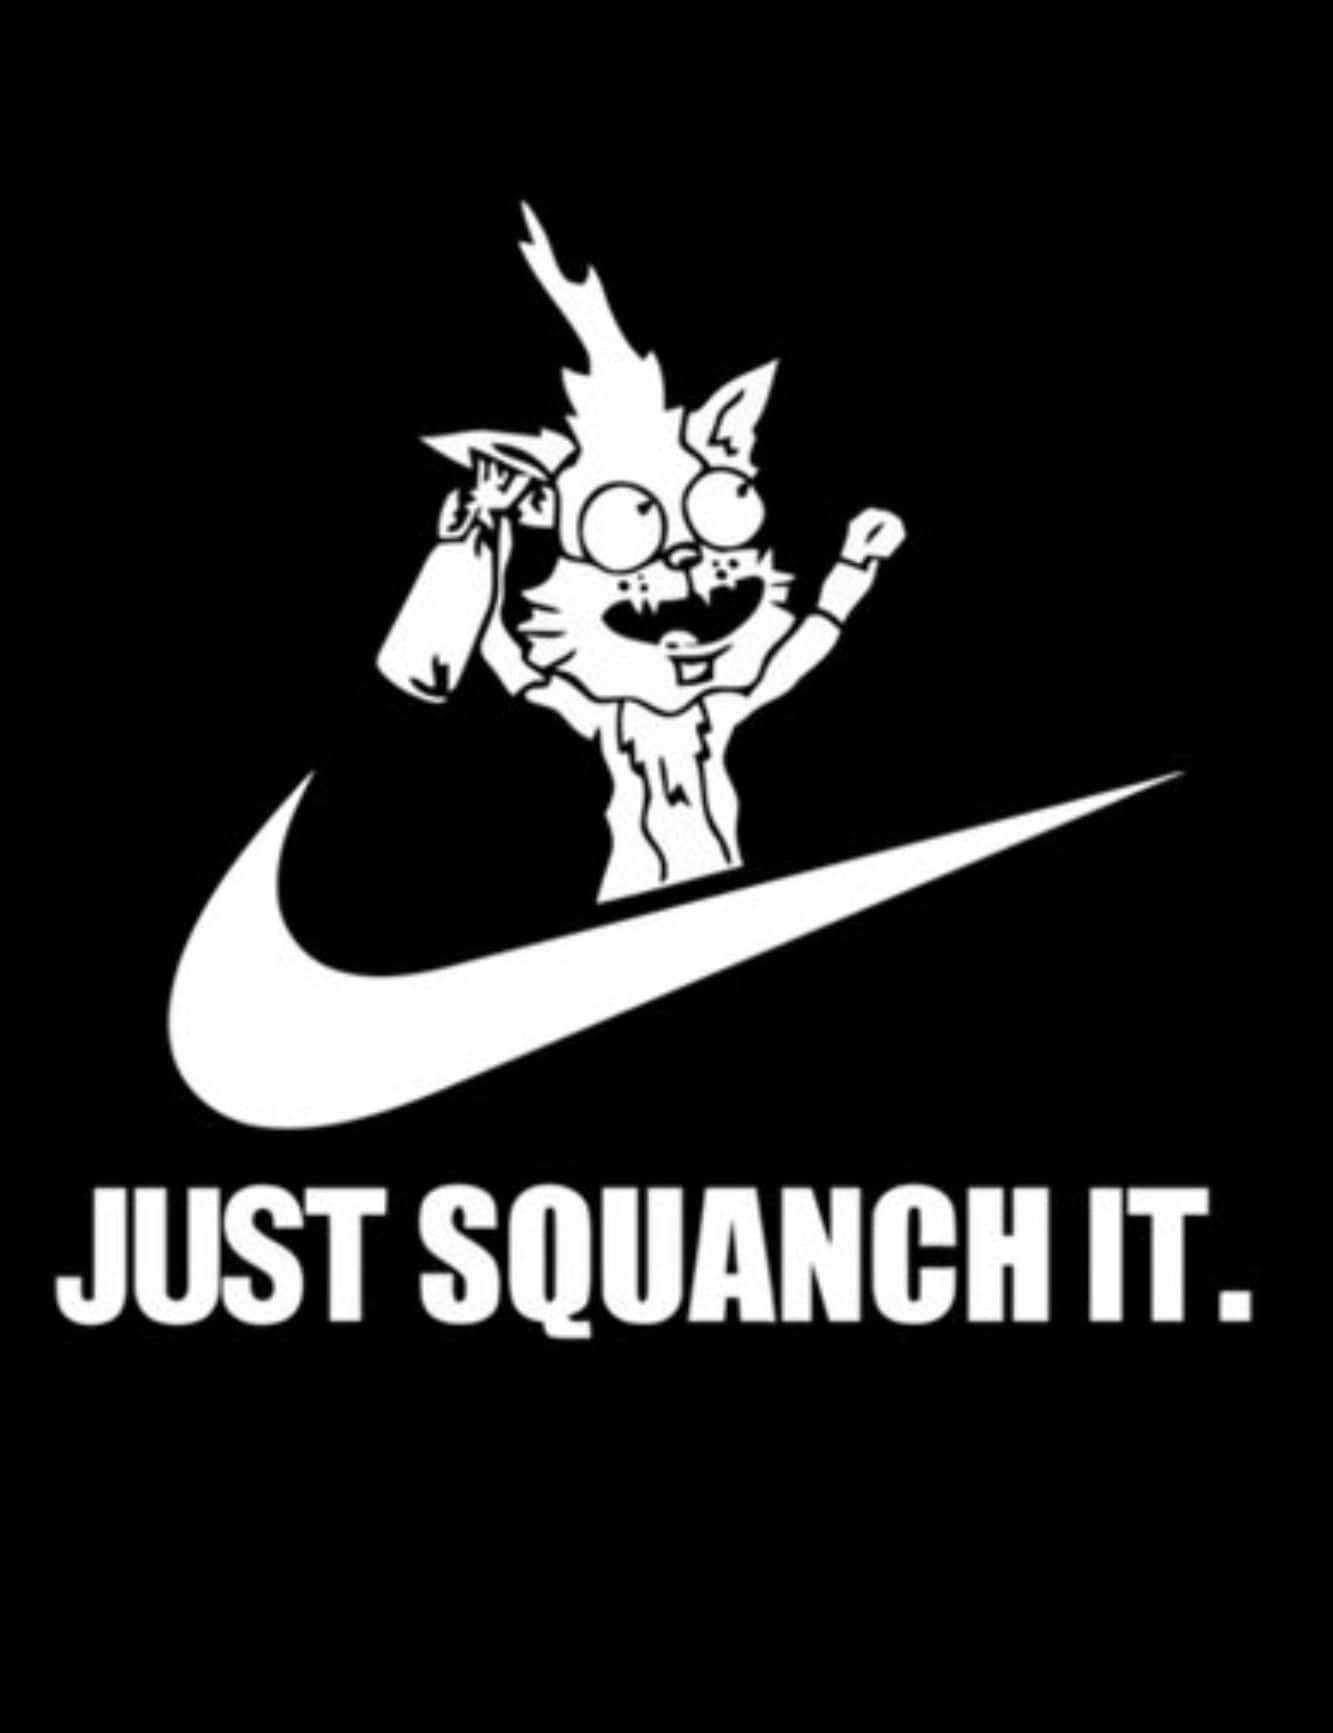 Squanchy, the lovable cat-like creature from the popular TV show Rick and Morty. Wallpaper